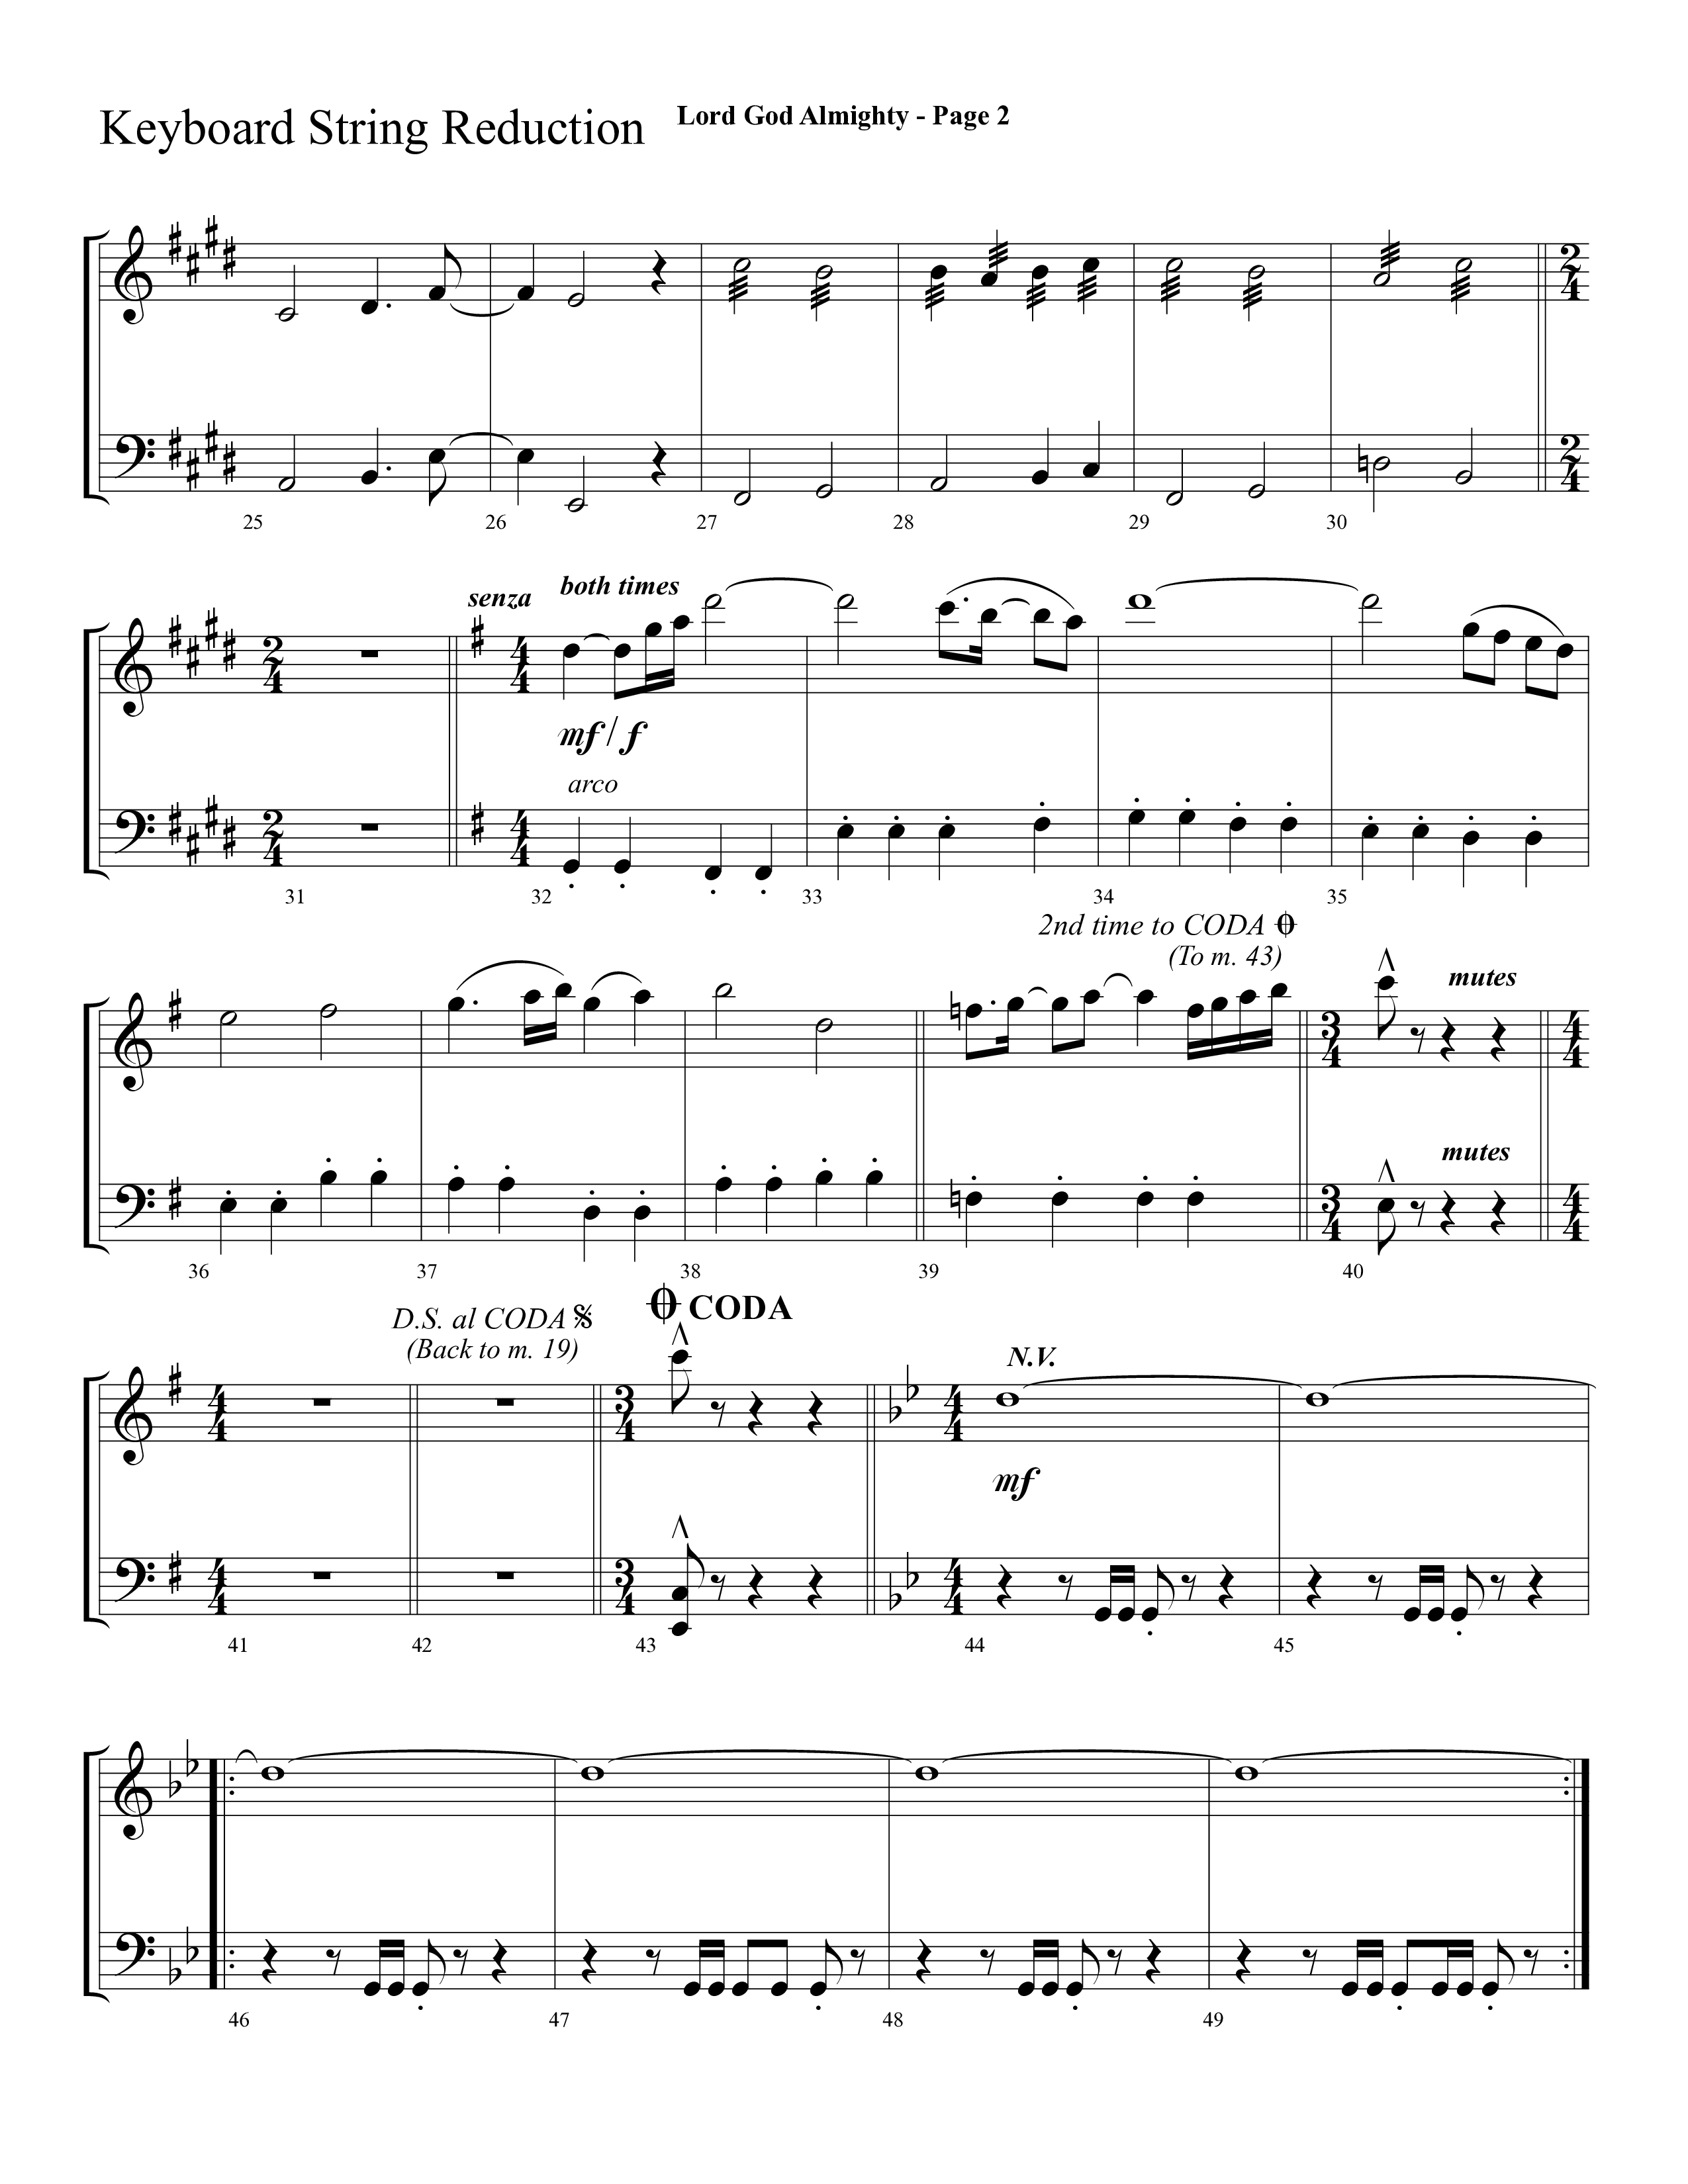 Lord God Almighty (Choral Anthem SATB) String Reduction (Lifeway Choral / Arr. Dave Williamson)